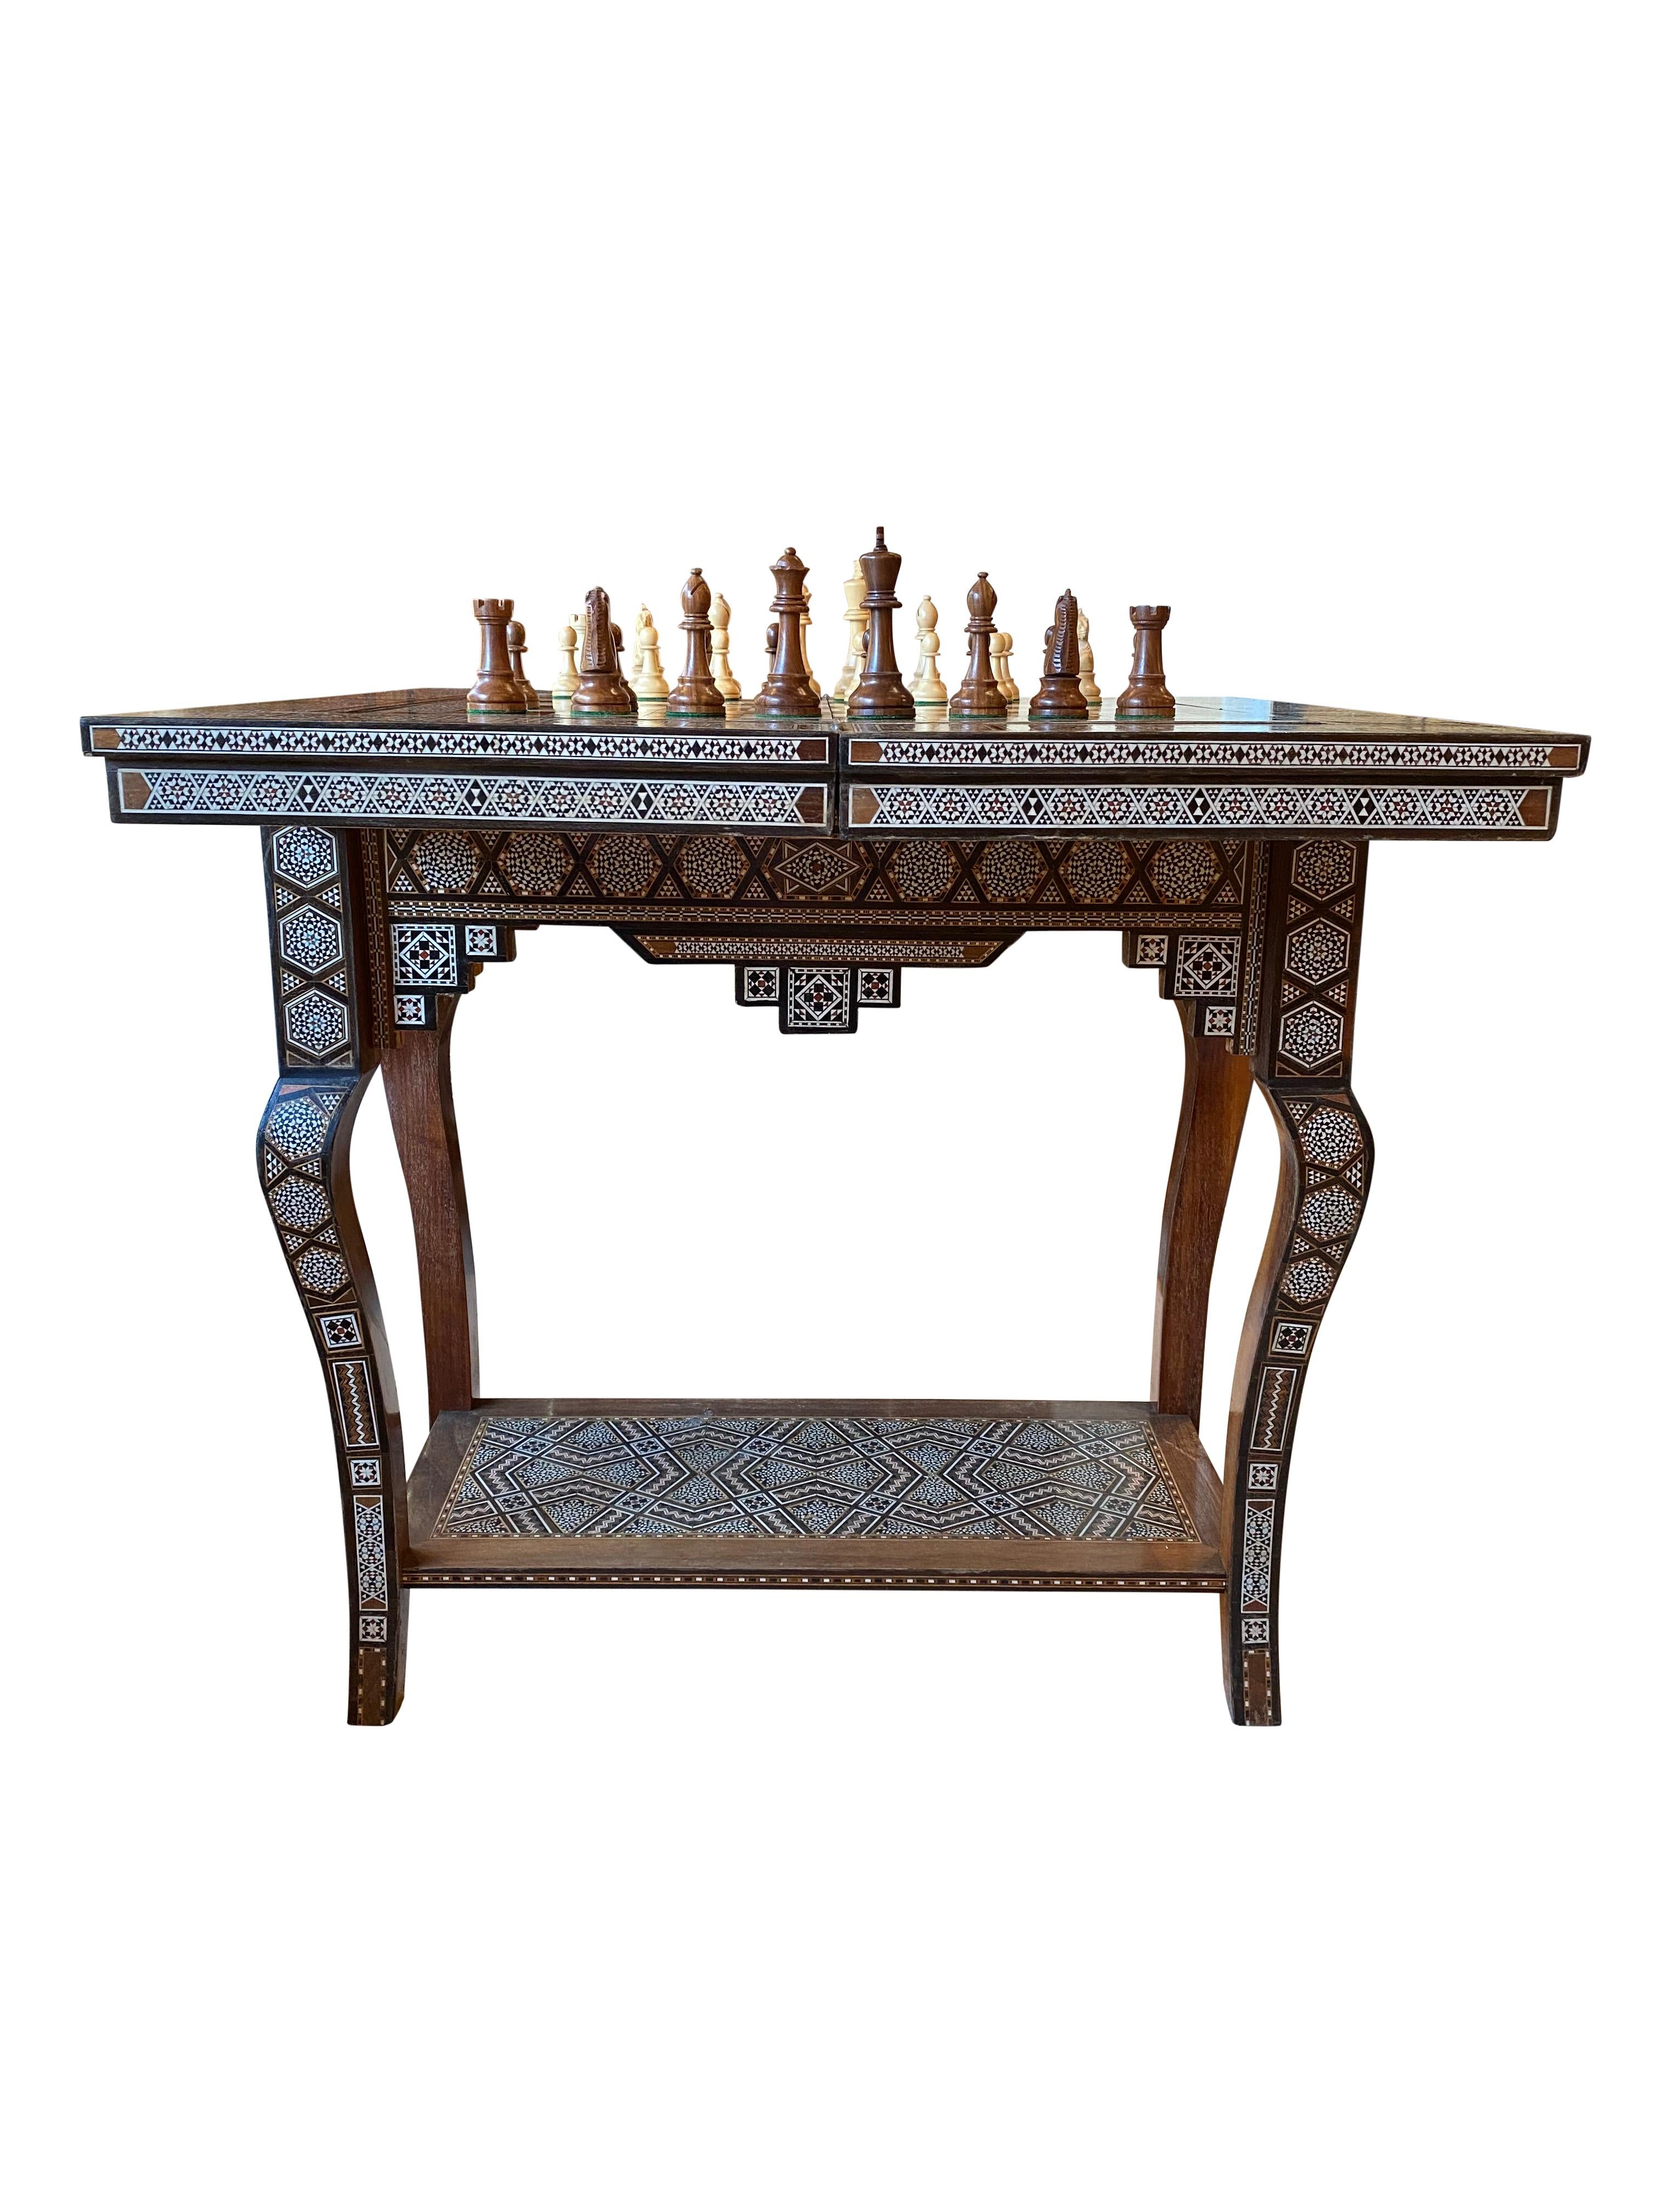 This profusely inlaid Syrian Damascus games table dates from circa 1910, and has multiple geometric and asymmetric inlays of various woods and mother of pearl.

The hinged lid opens to reveal a similarly inlaid interior and a removable reversible